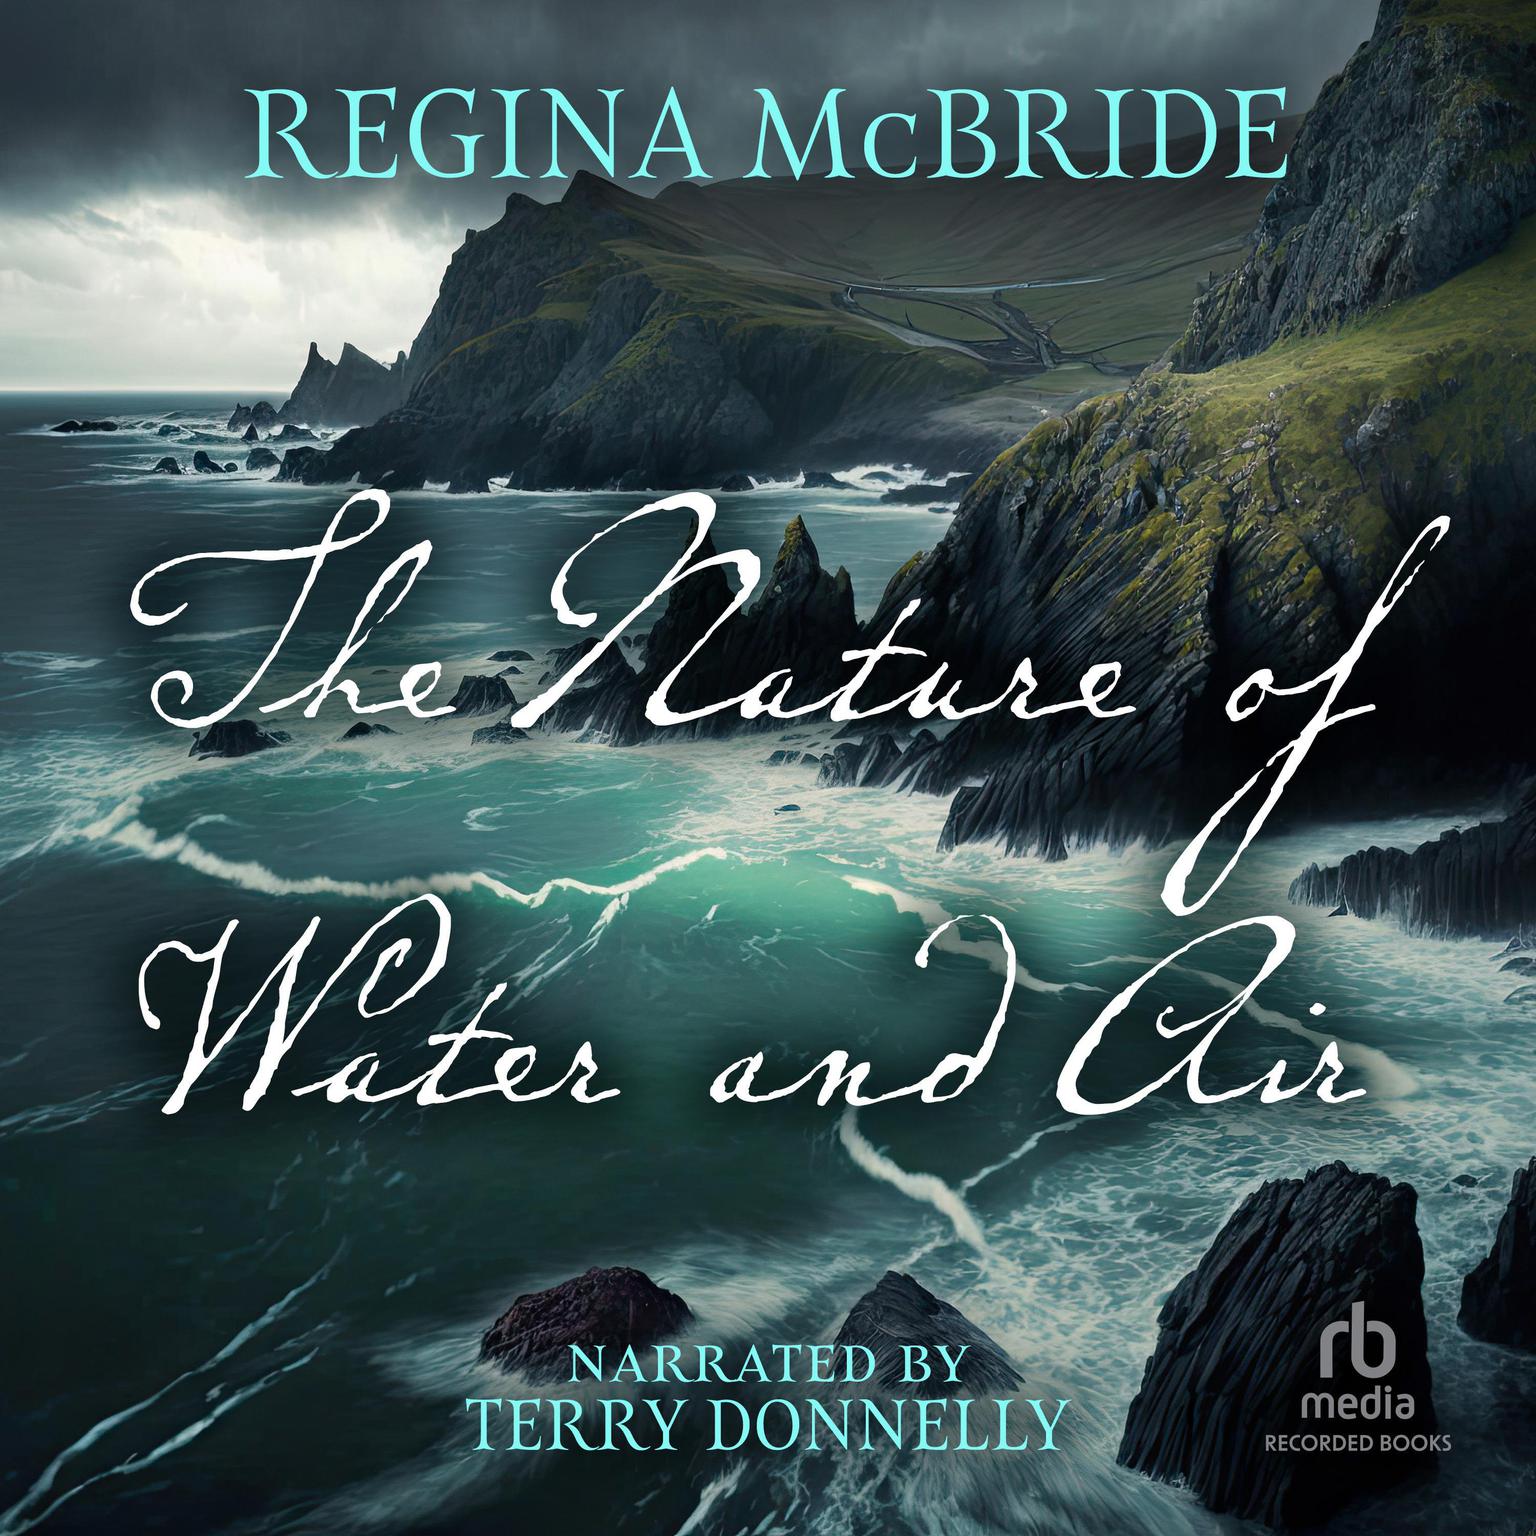 The Nature of Water and Air Audiobook, by Regina McBride